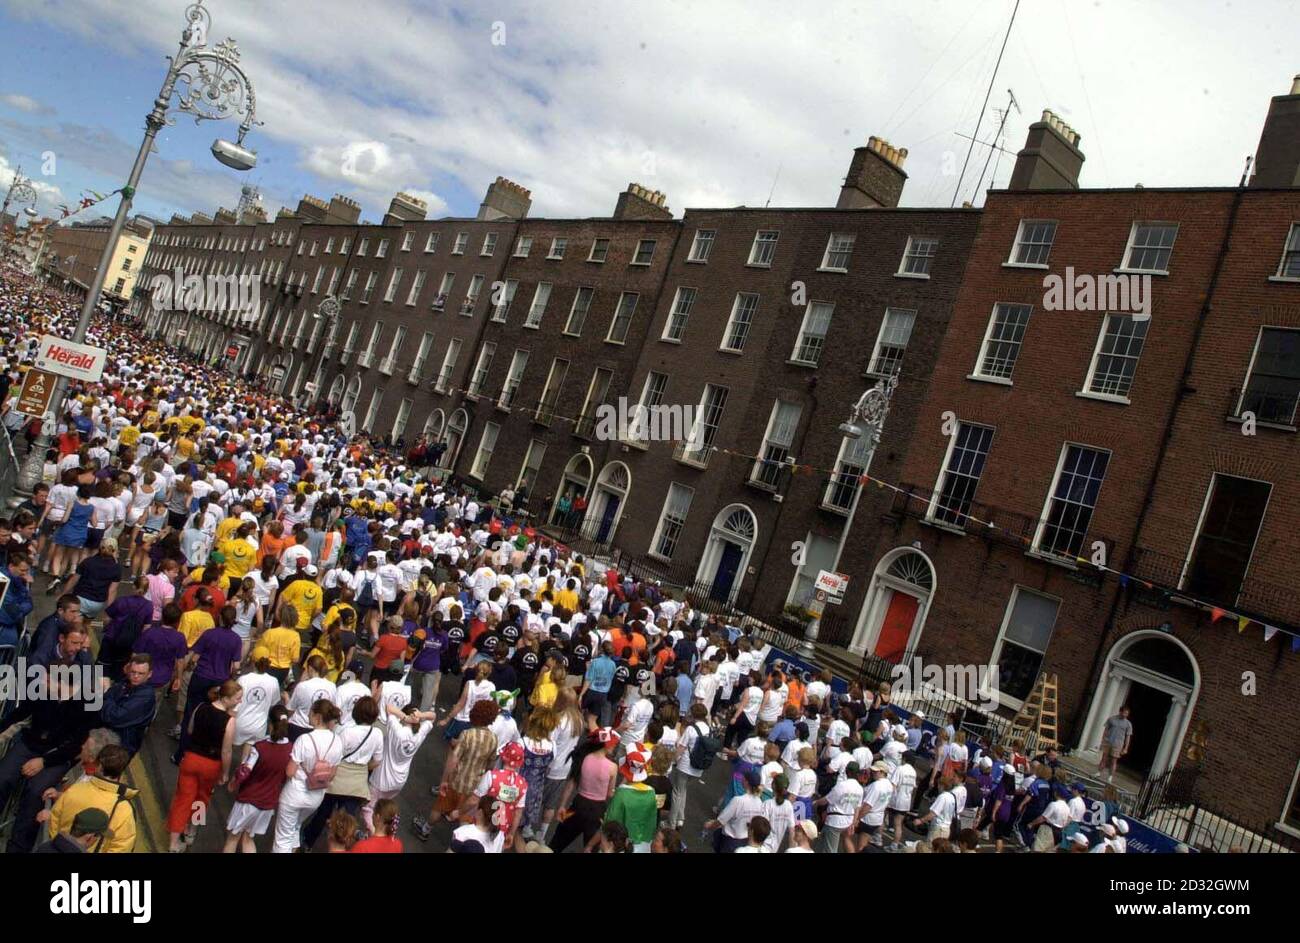 Competitors in the Tesco Ireland Mini-Marathon, at the start of the 6.2 mile race around the streets of Dublin. The race attracted approximately 40,000 competitors, many of which were raising money for charity in fancy dress.  Stock Photo